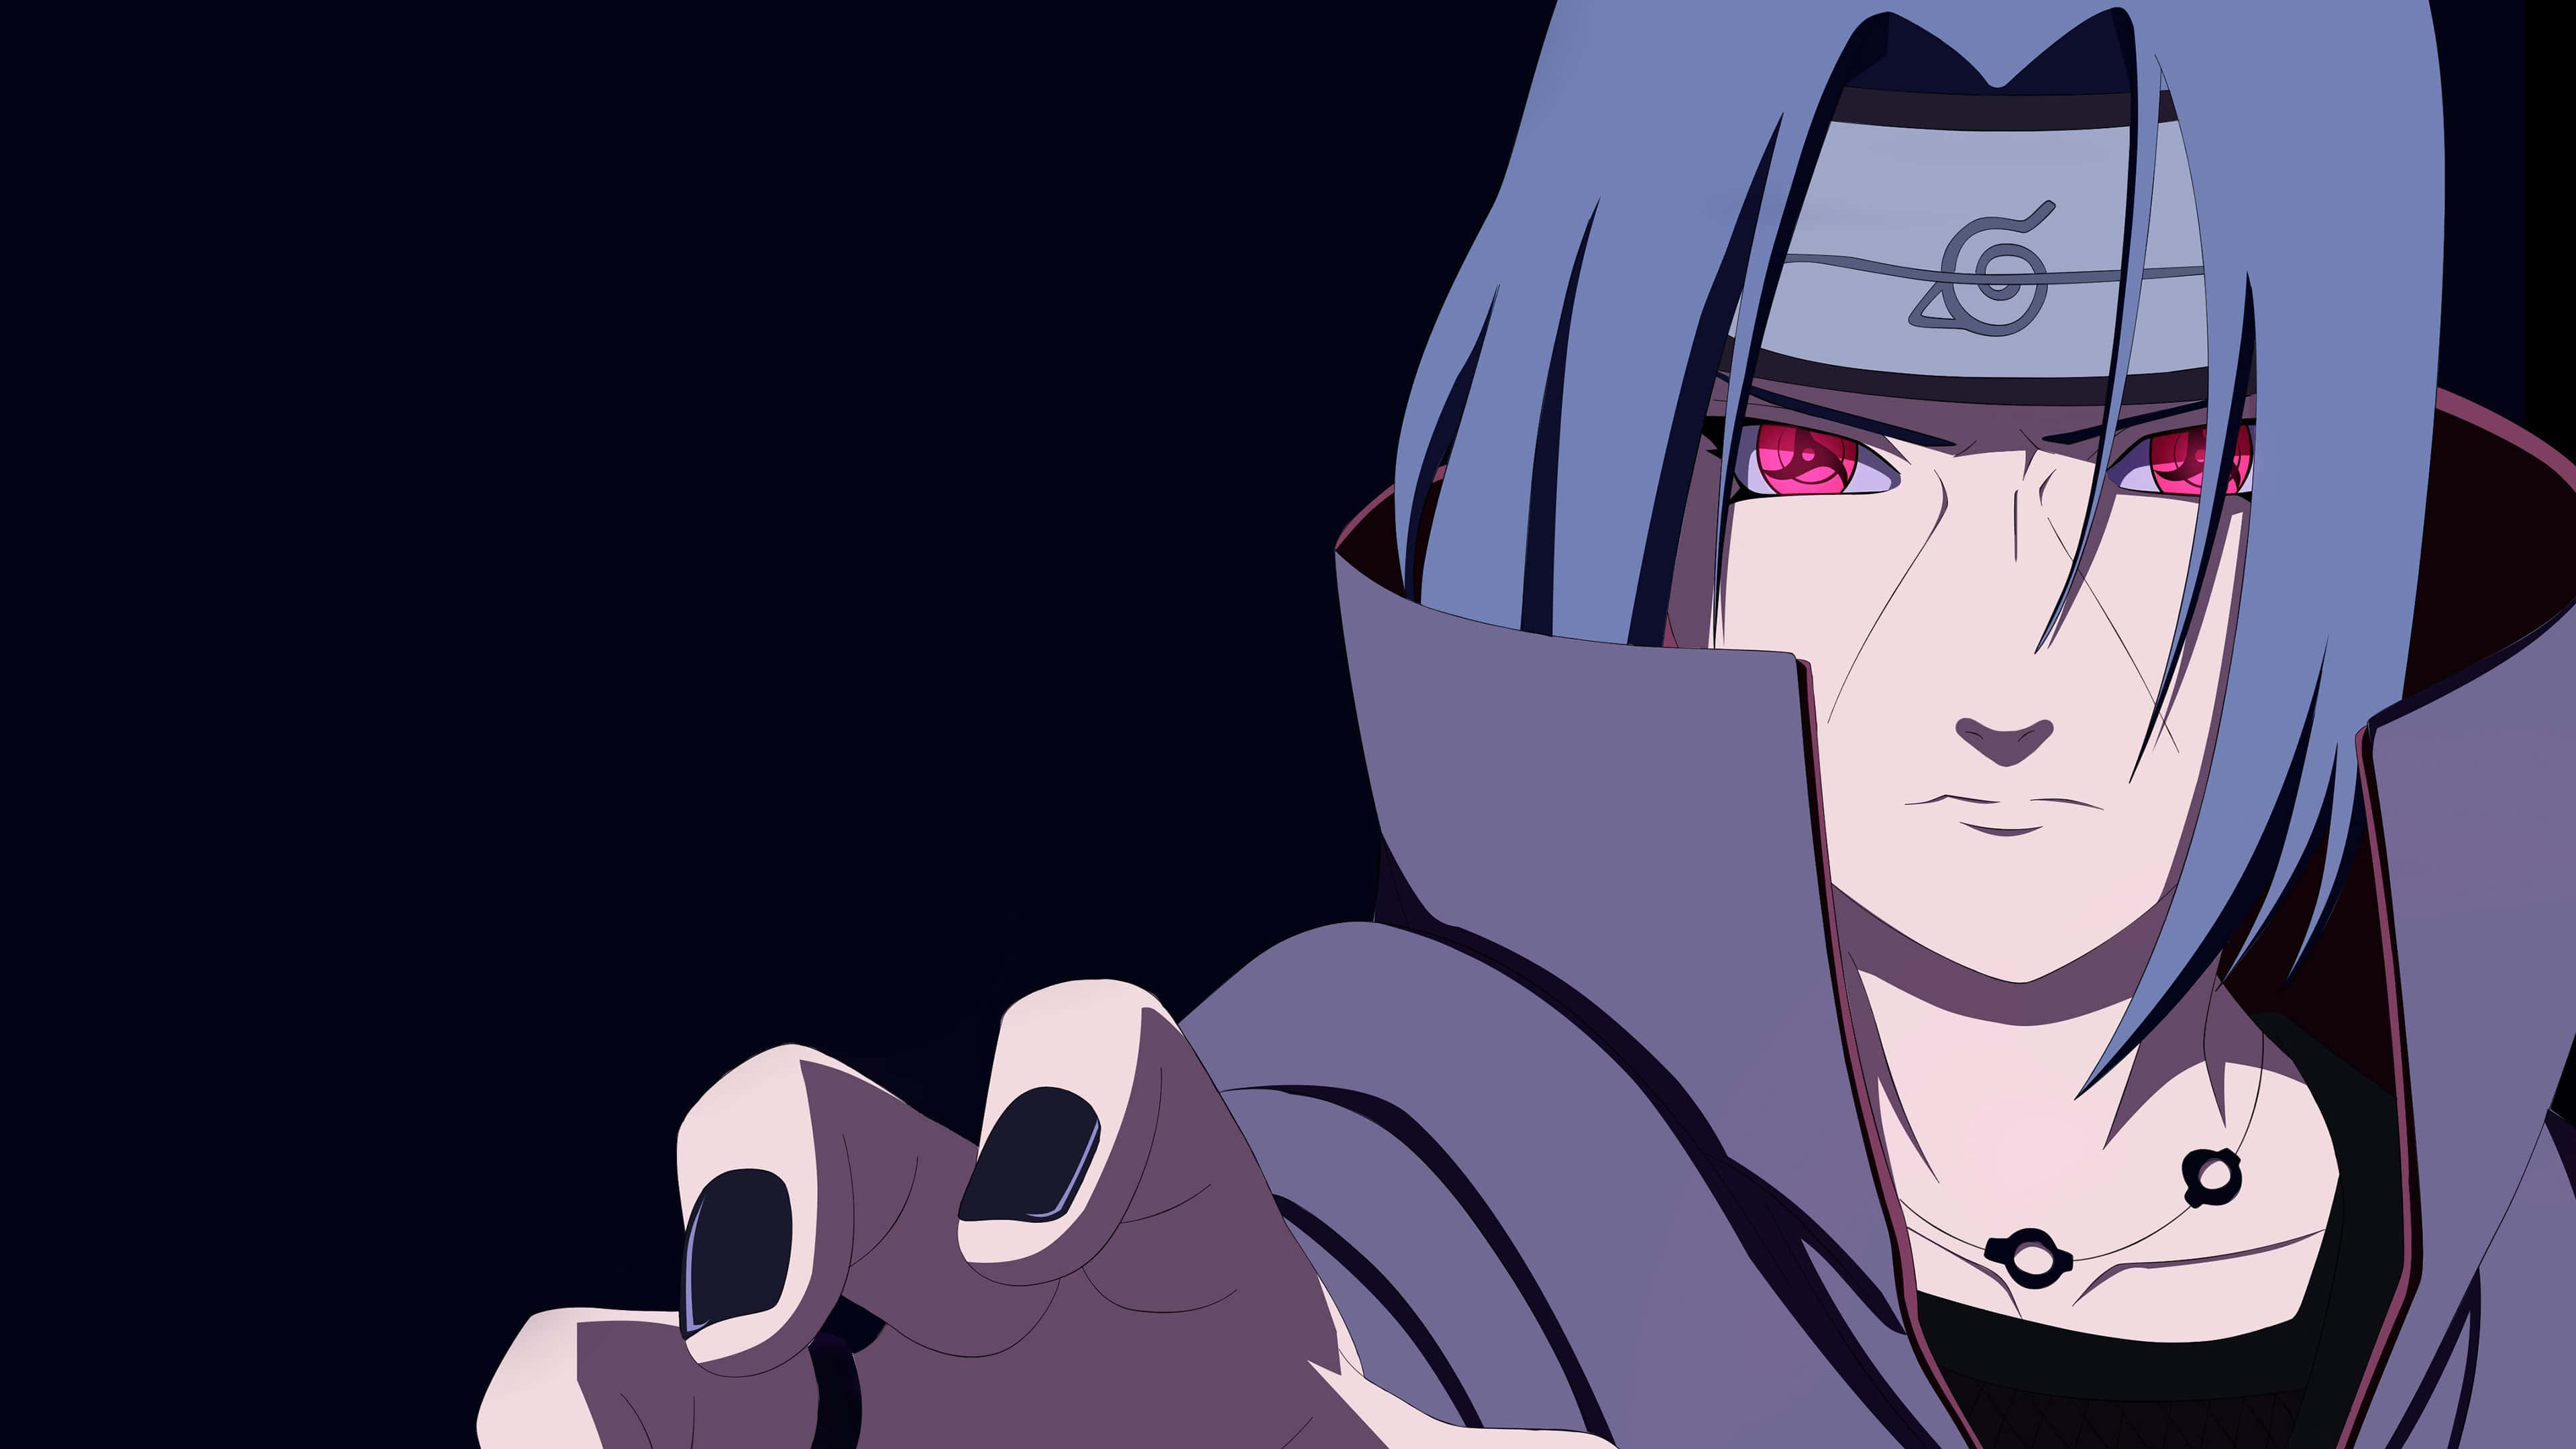 Itachi Oneplus 6 wallpaper  Page 2 of 7  The RamenSwag